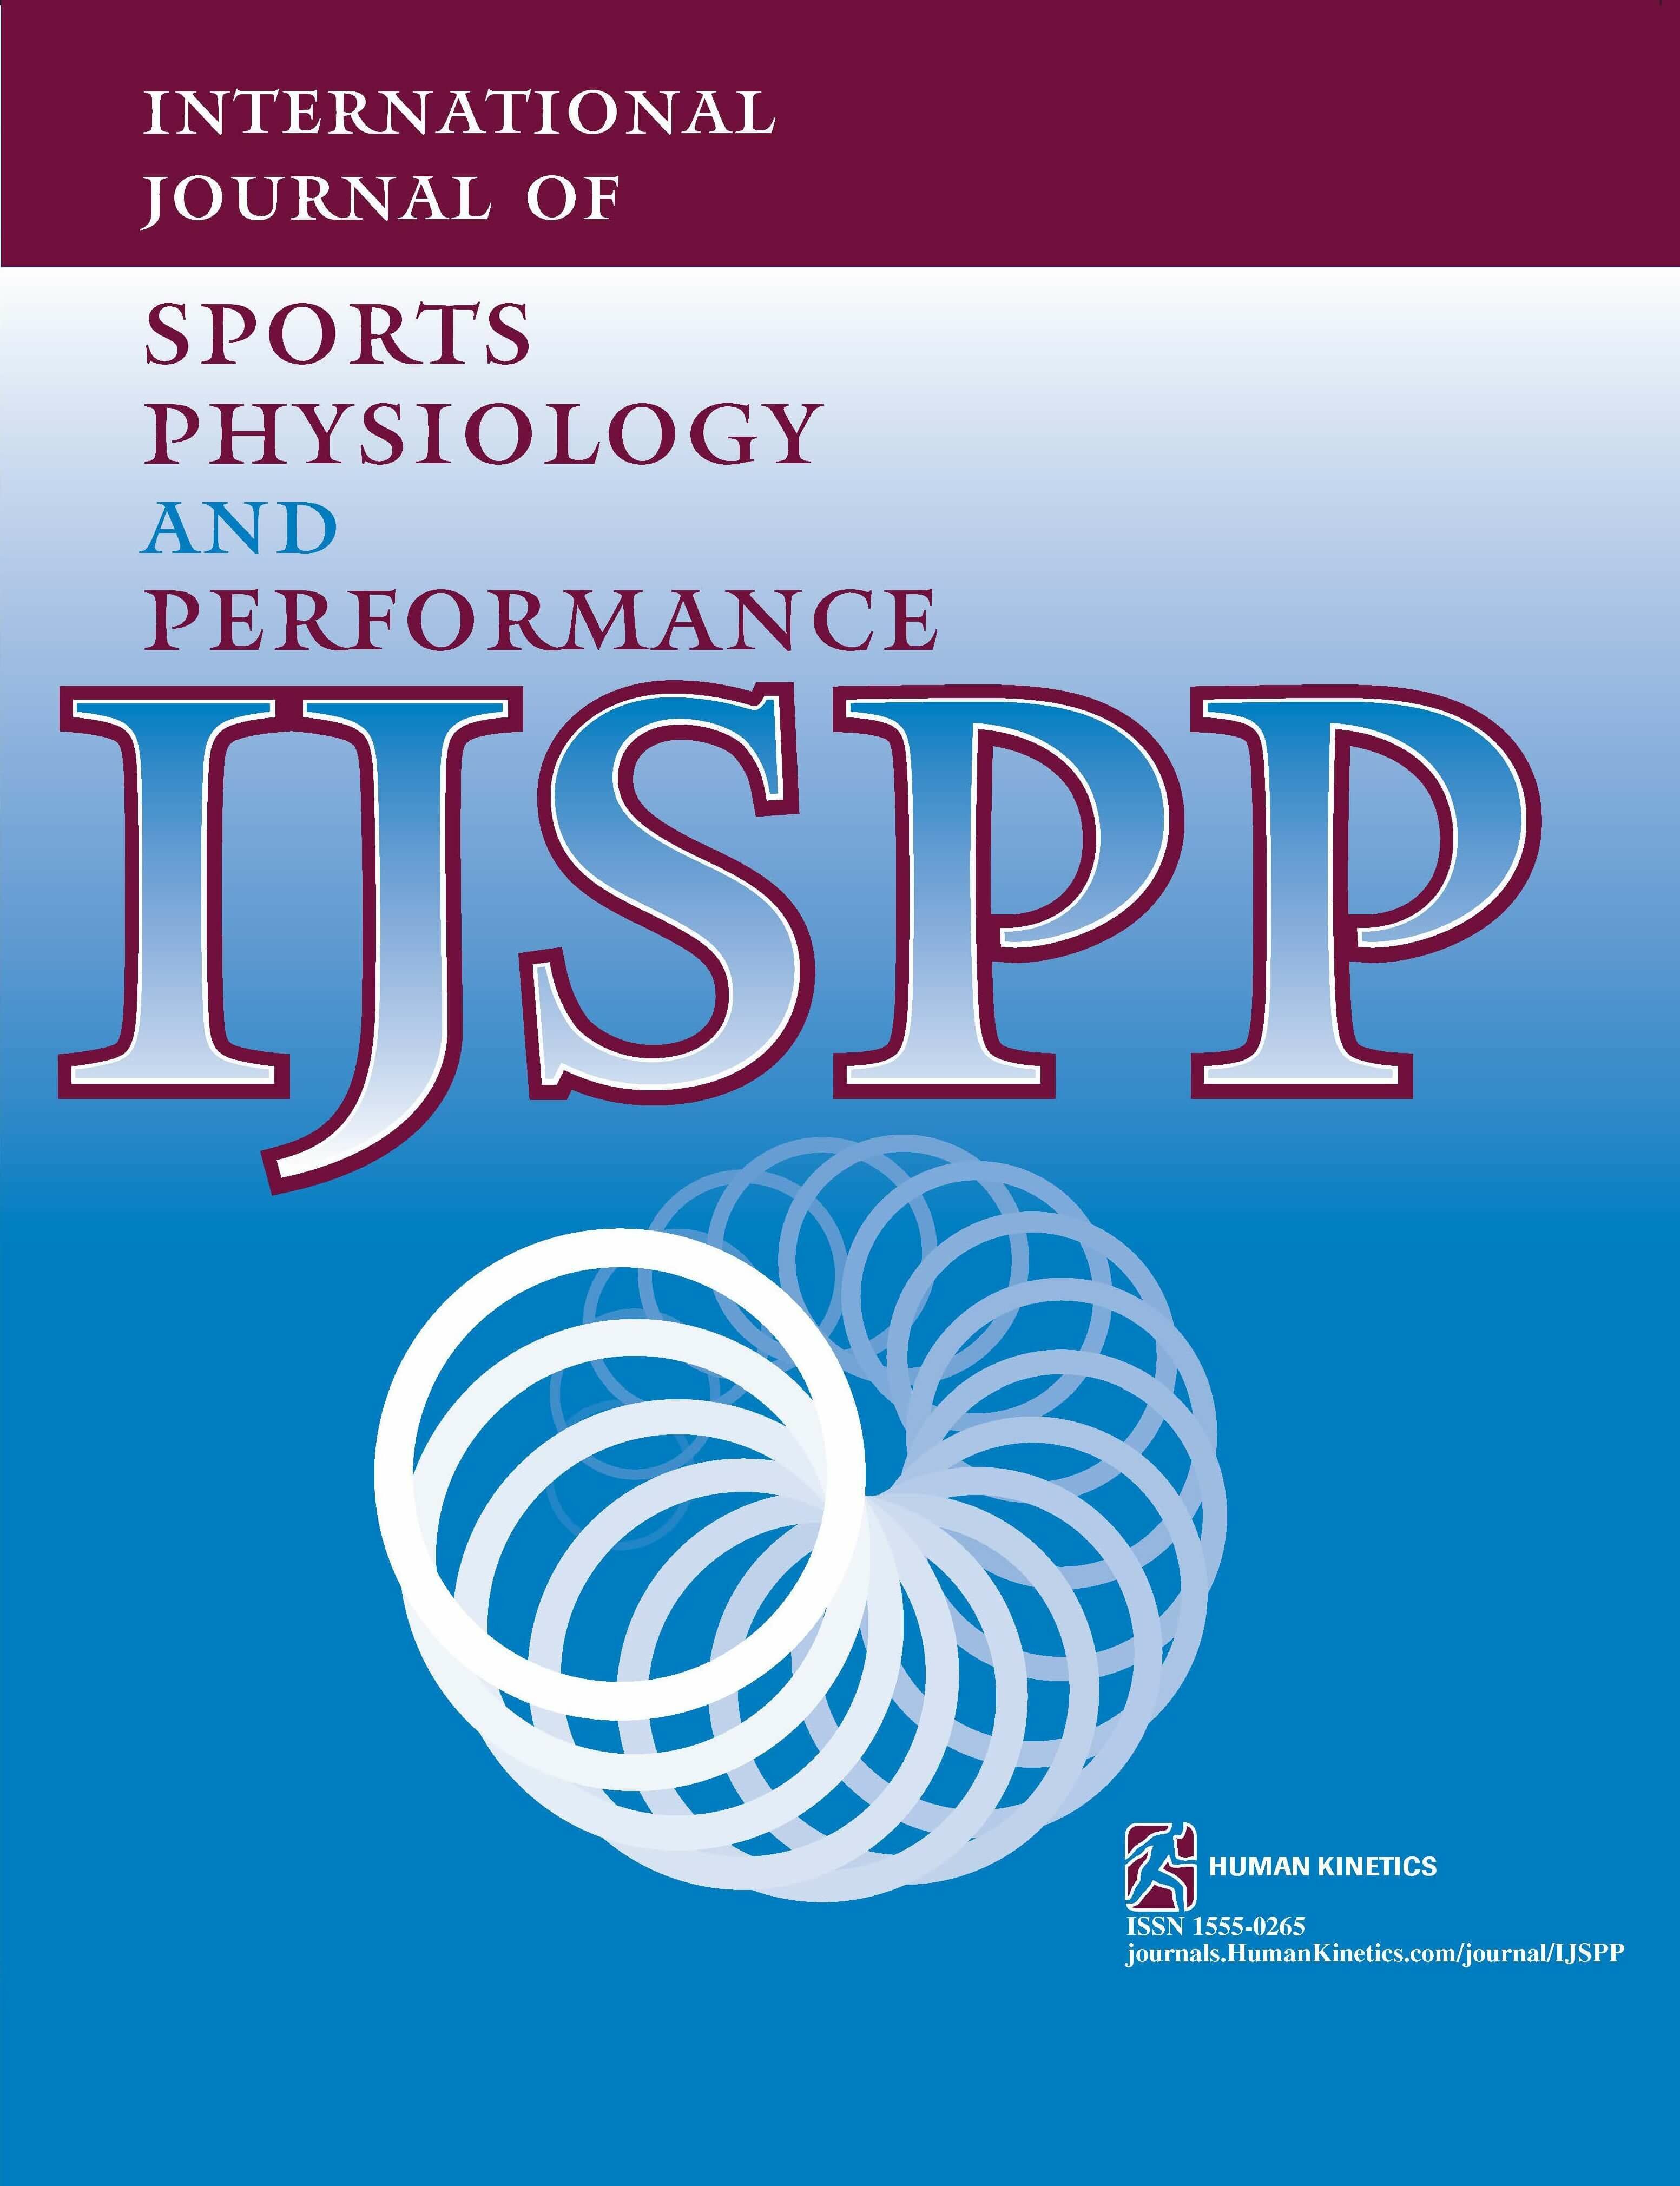 Effects of Hypoxia Severity on Muscle Oxygenation Kinetics Using Statistical Parametric Mapping During Repeated Treadmill Sprints